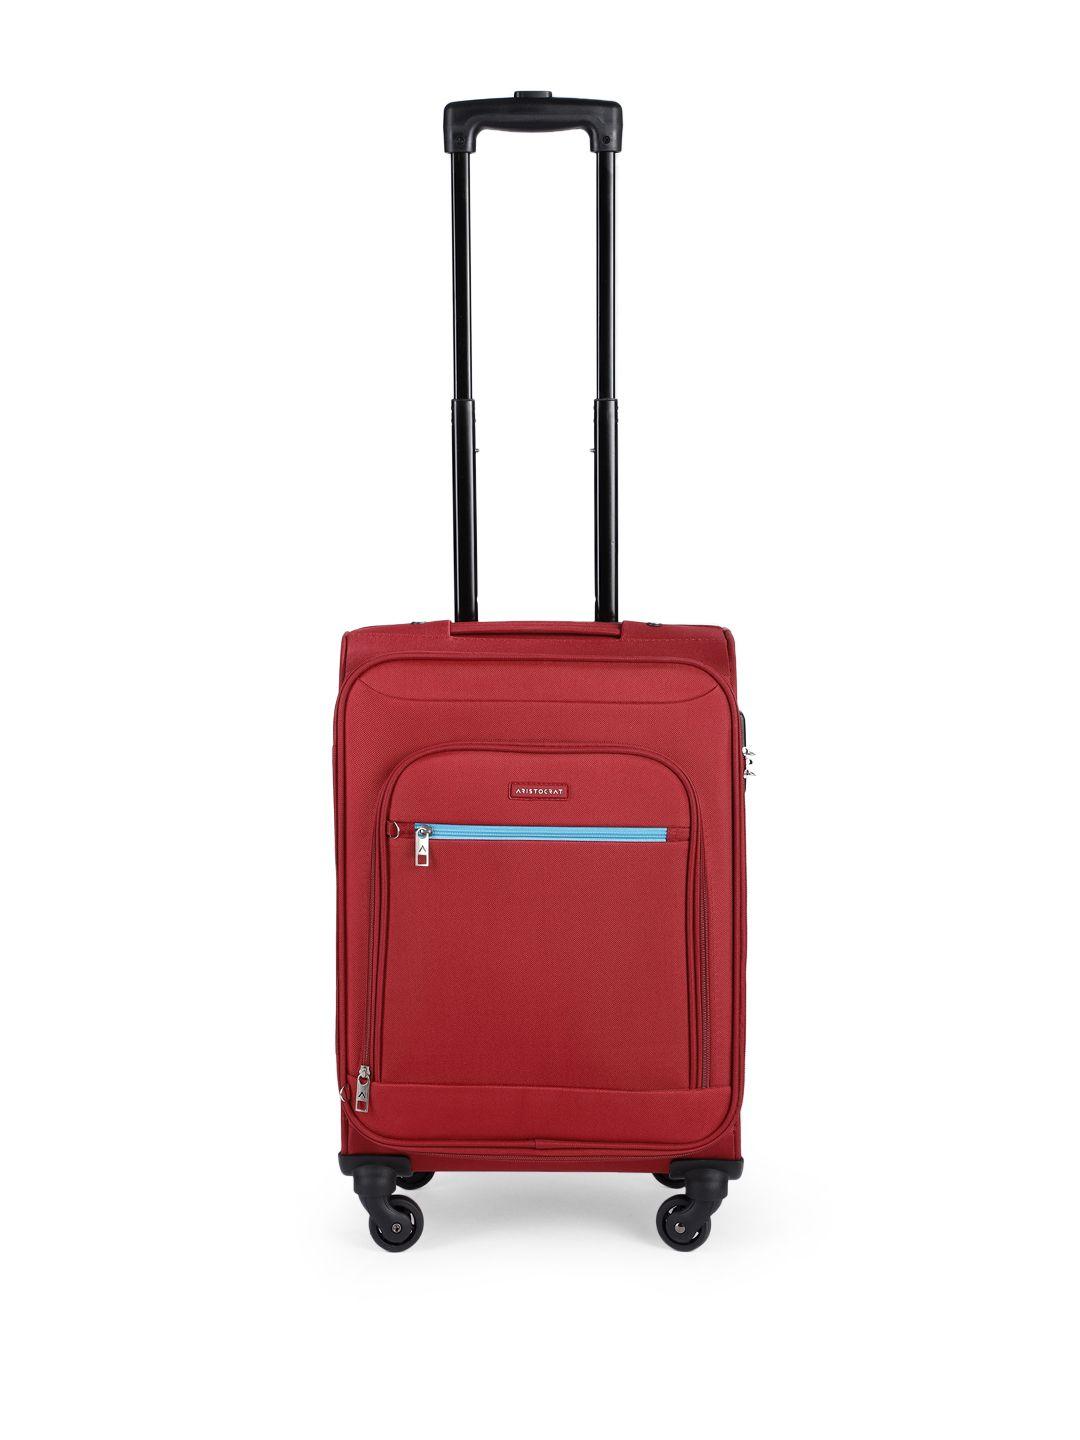 aristocrat-bright-red-solid-nile-exp-strolly-54-cabin-trolley-suitcase